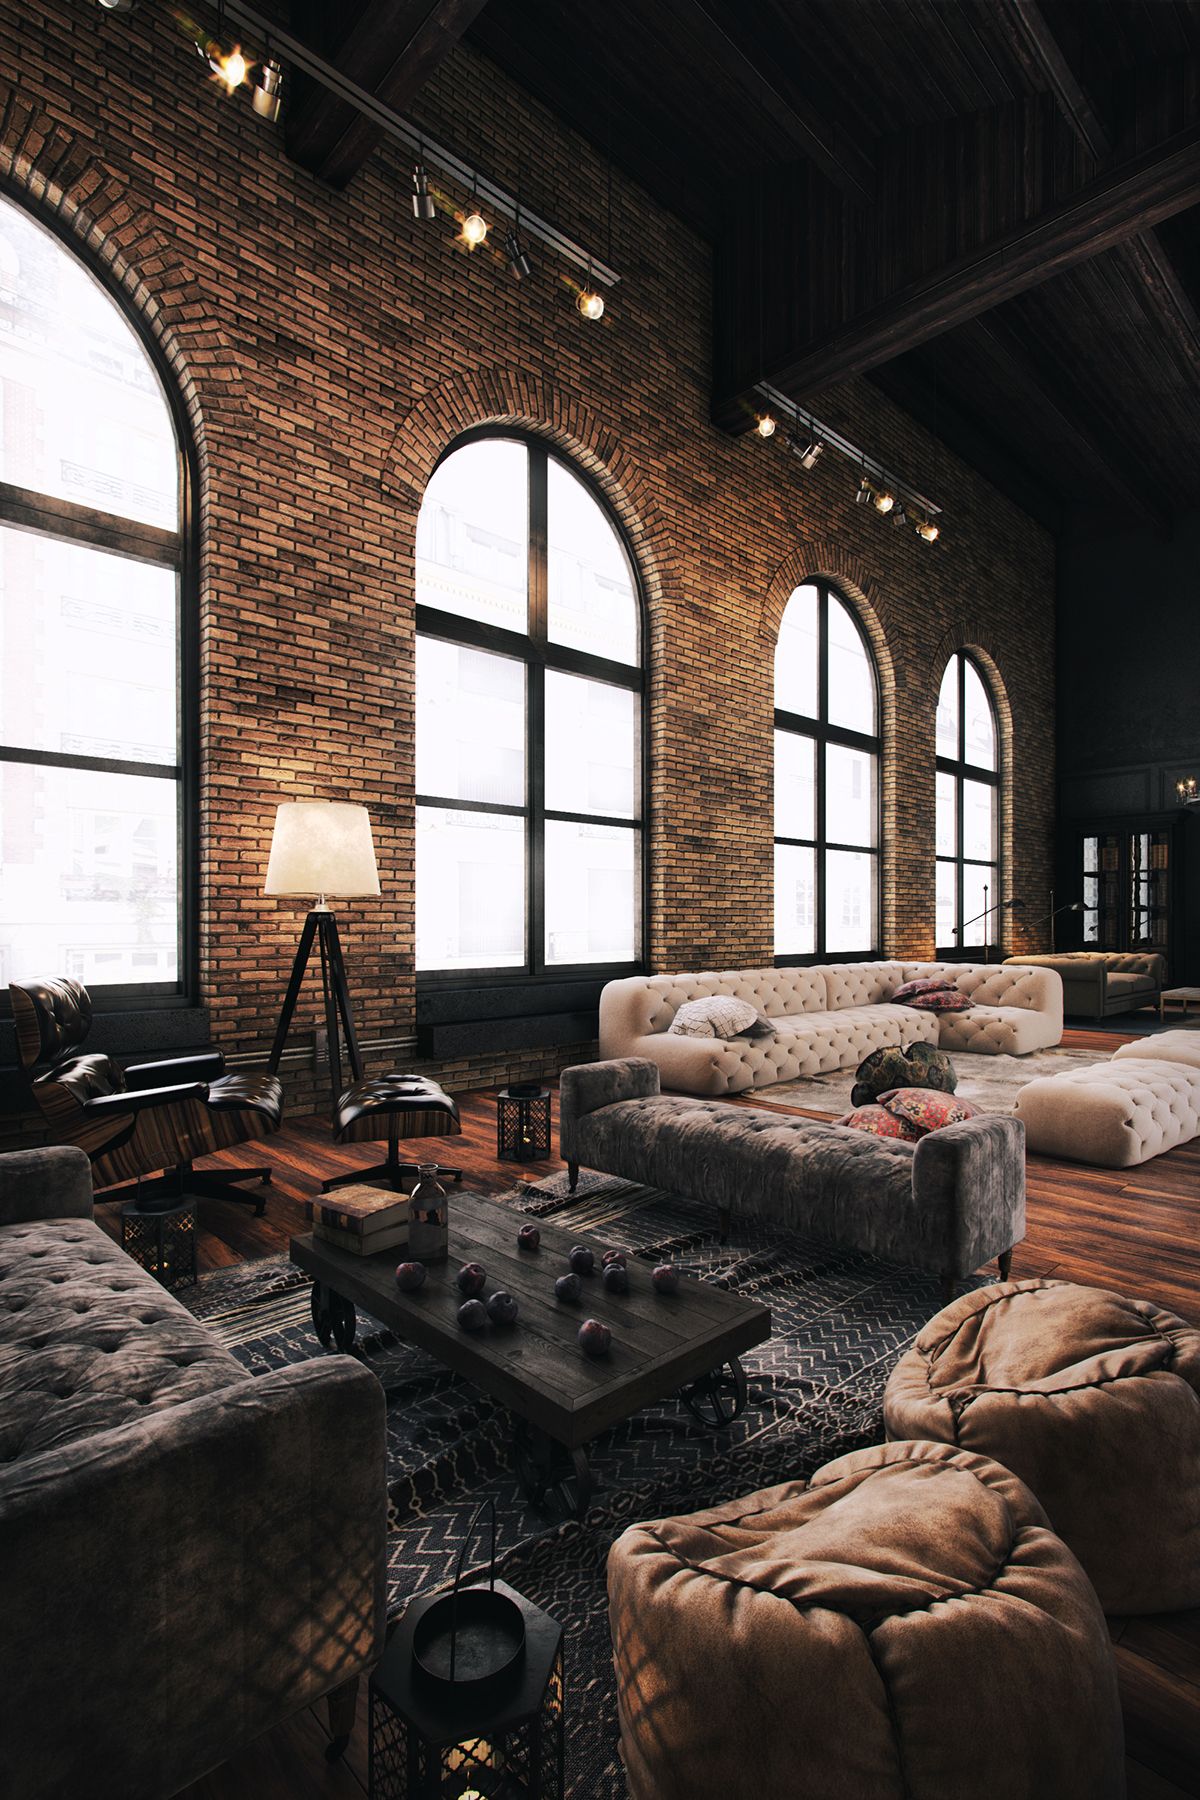 An Enormous Loft House with Industrial Finishing and Old Furniture